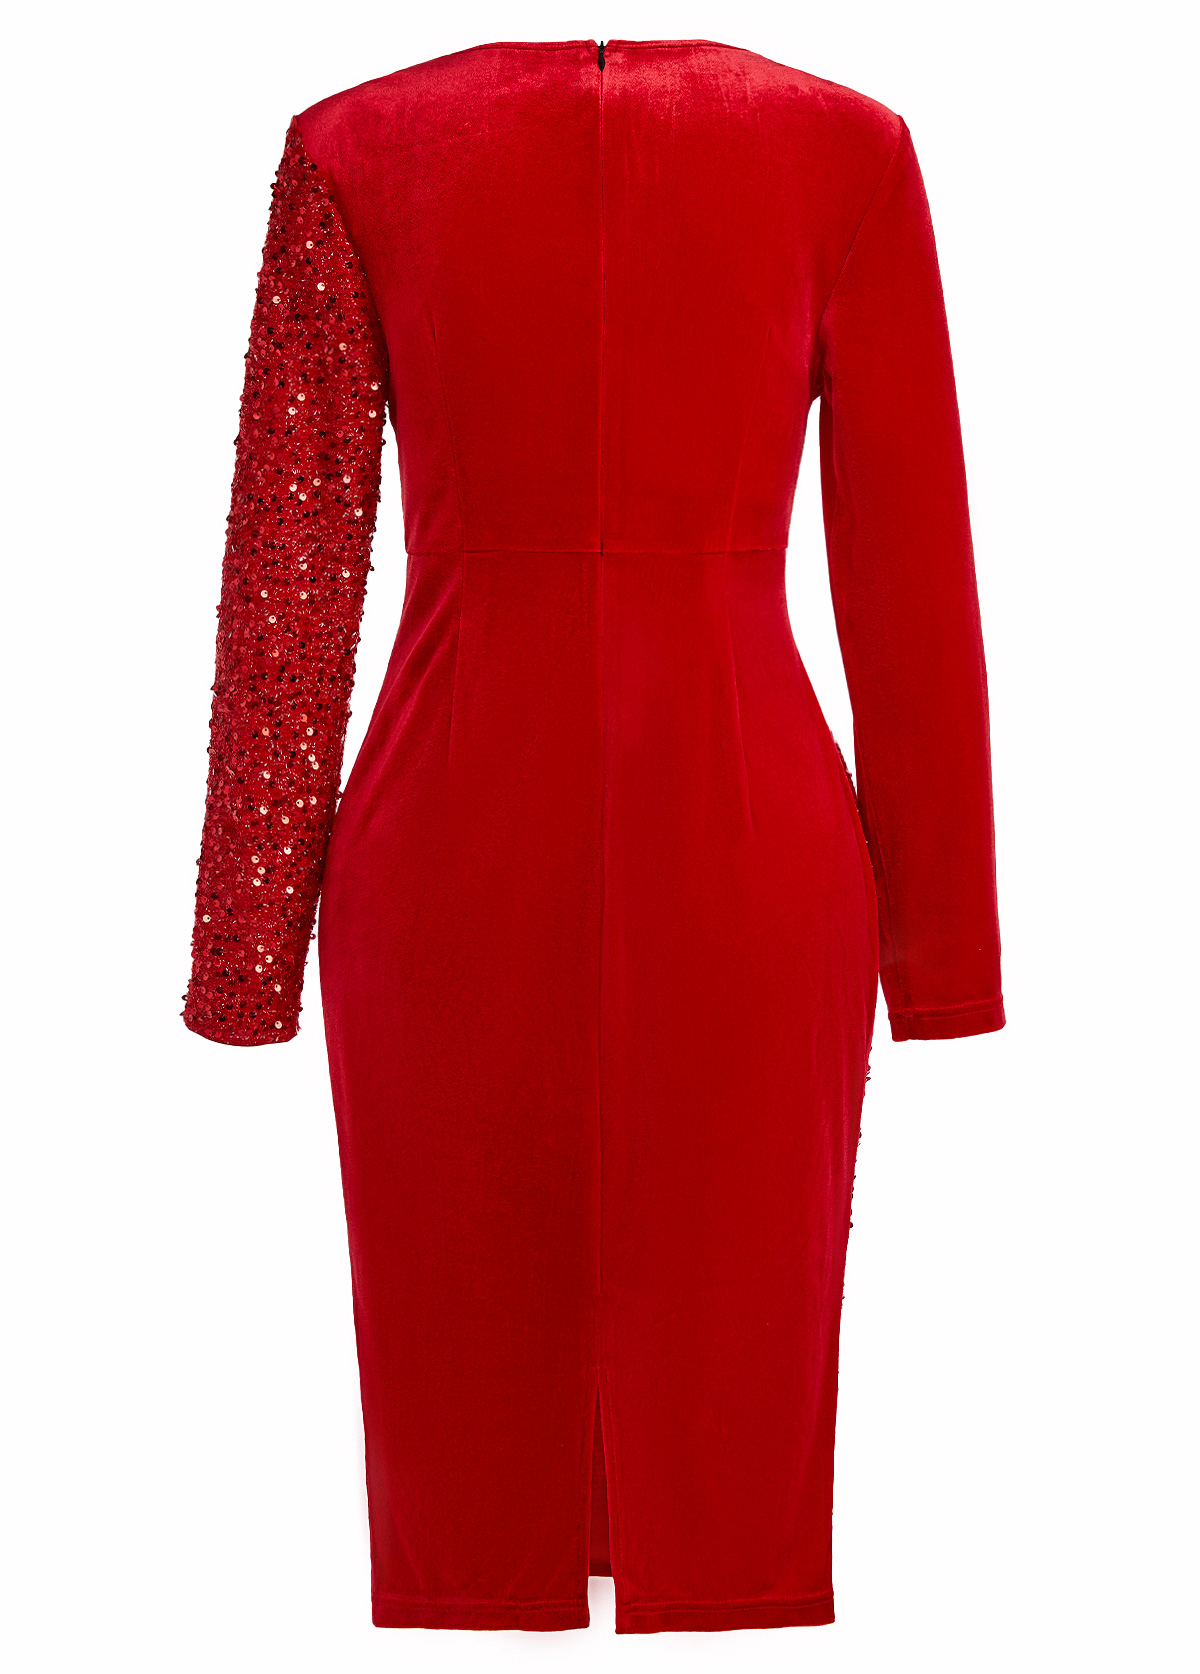 Sequin Red Long Sleeve Round Neck Bodycon Dress